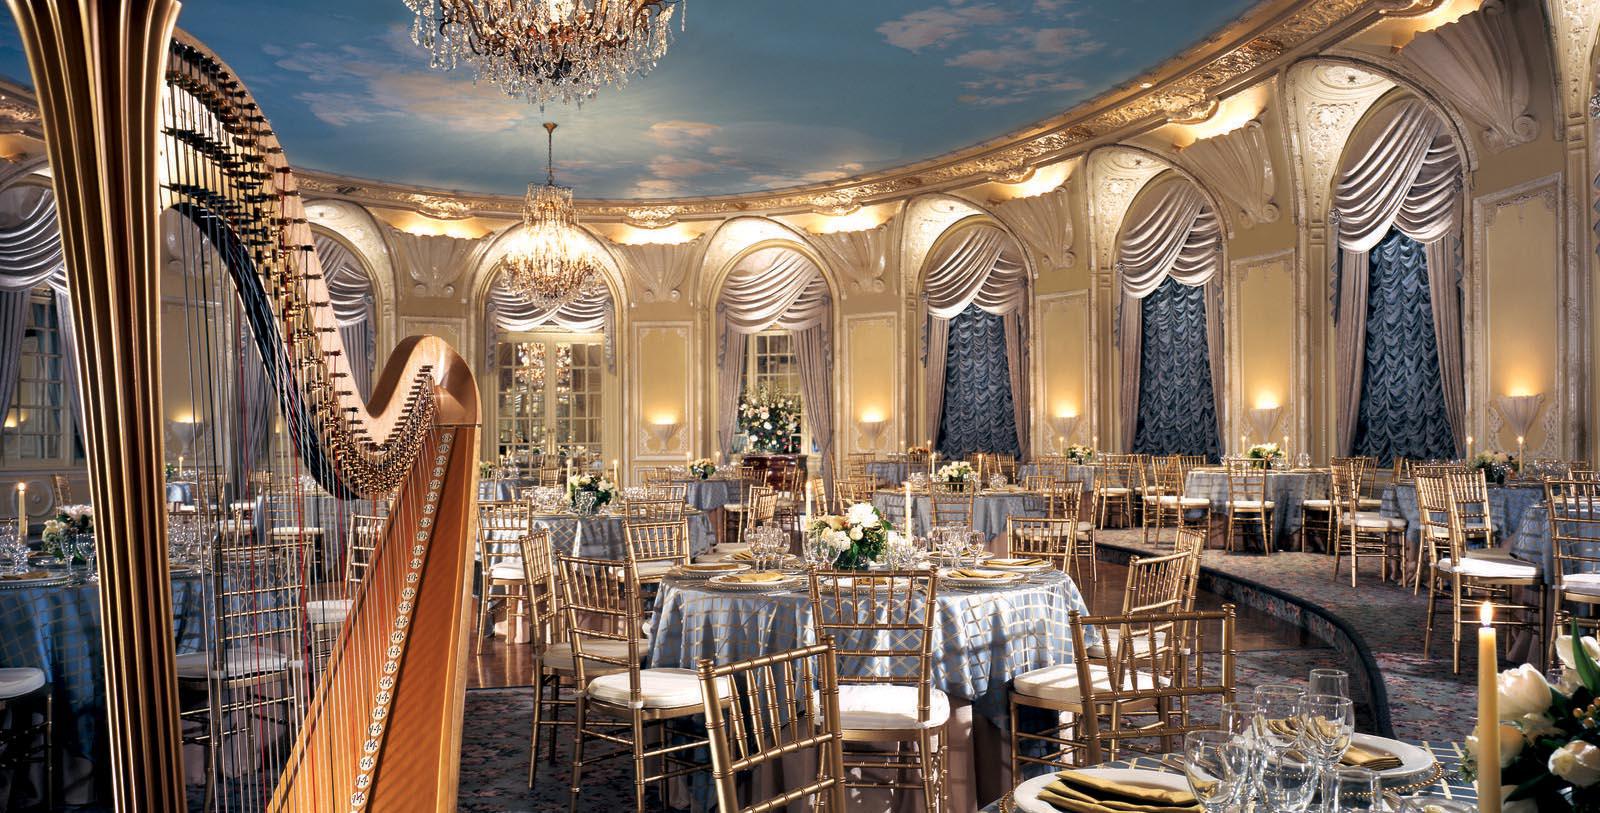 Image of event space set up for wedding at Fairmont Copley Plaza, 1912, Member of Historic Hotels of America, in Boston, Massachusetts, Weddings